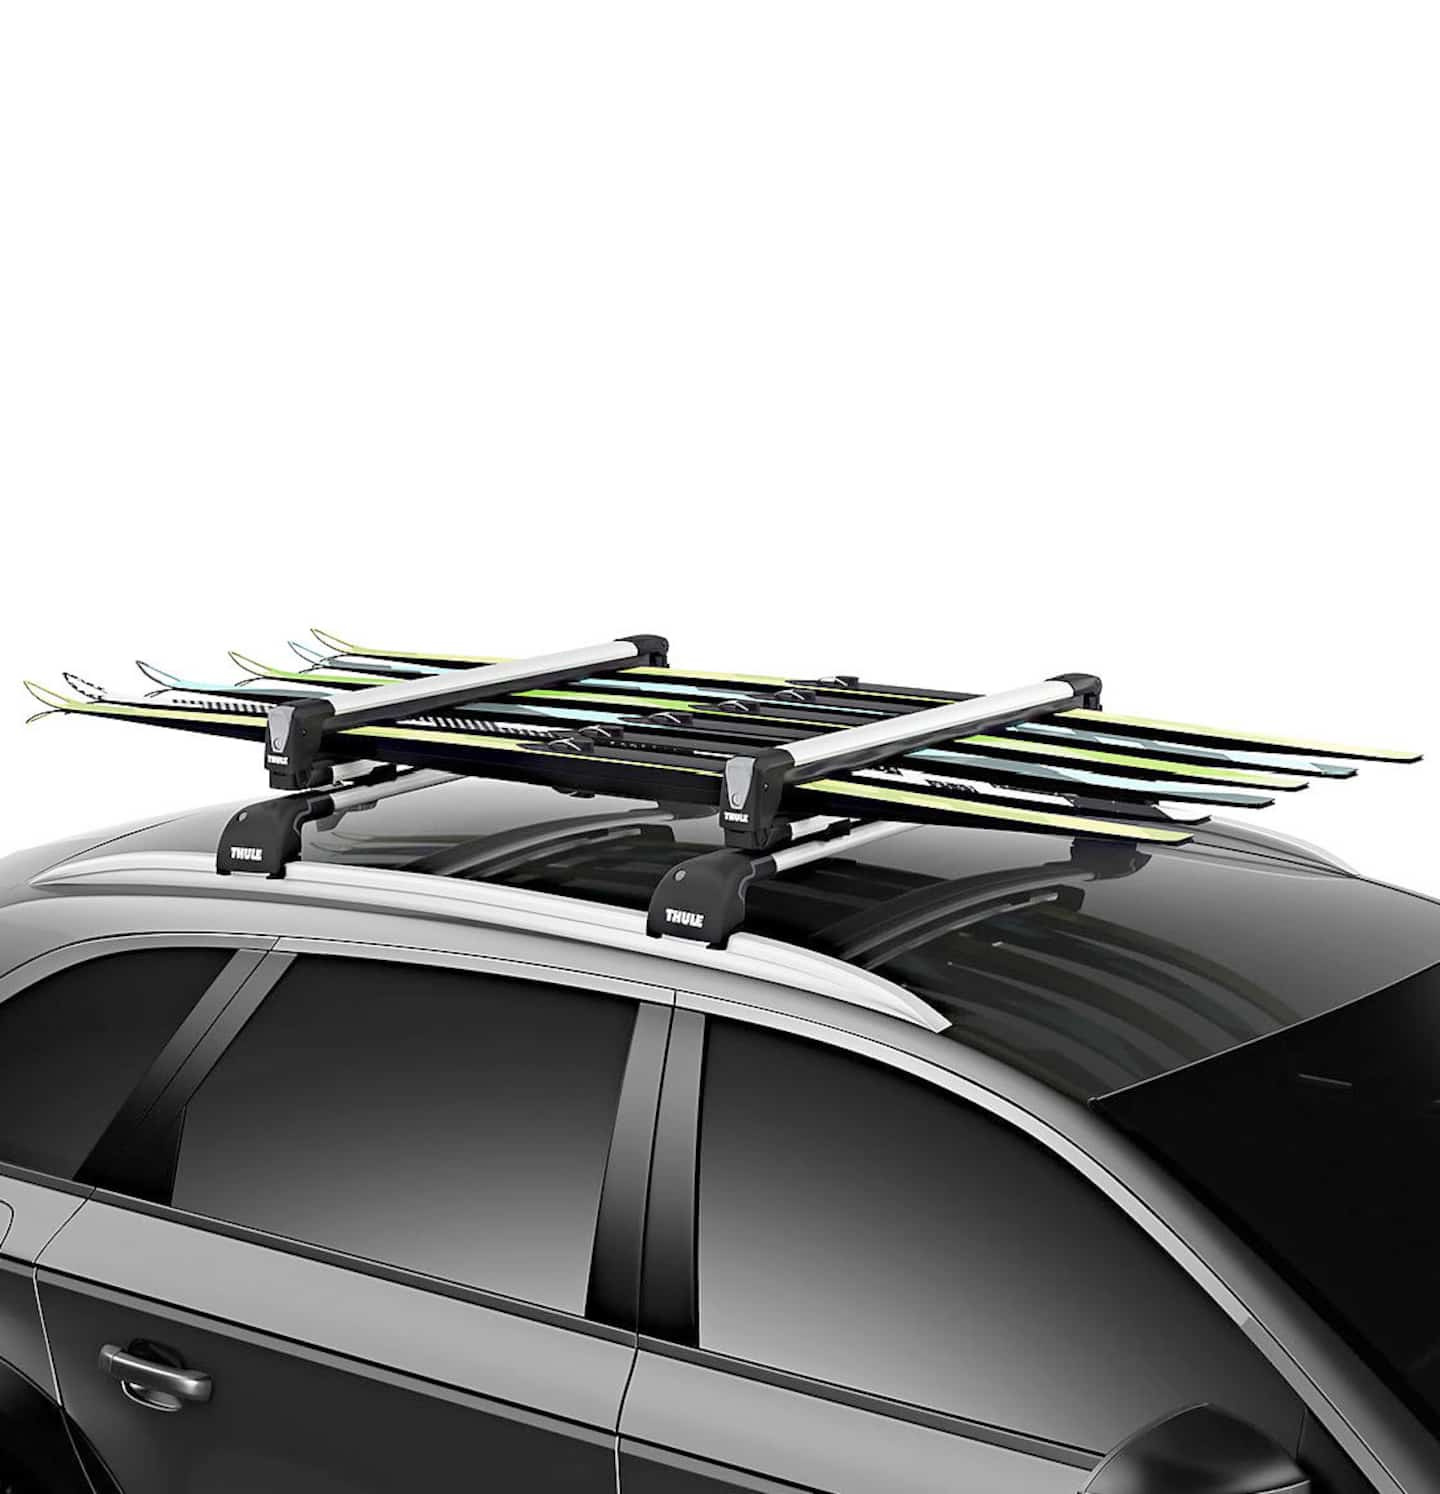 Transporting your skis without acrobatics